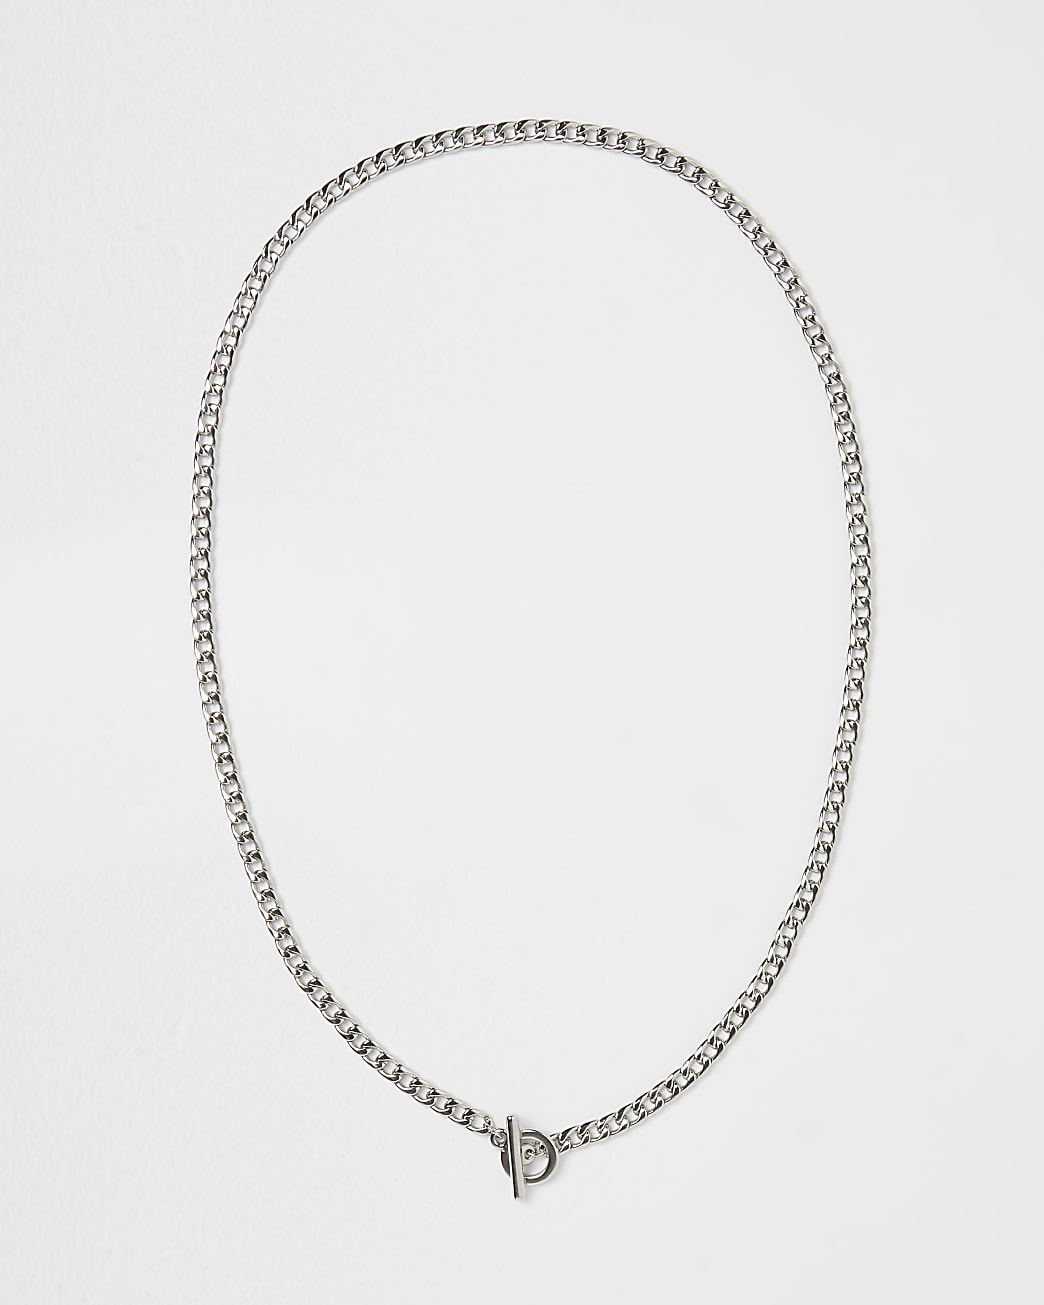 Silver t-bar chain necklace